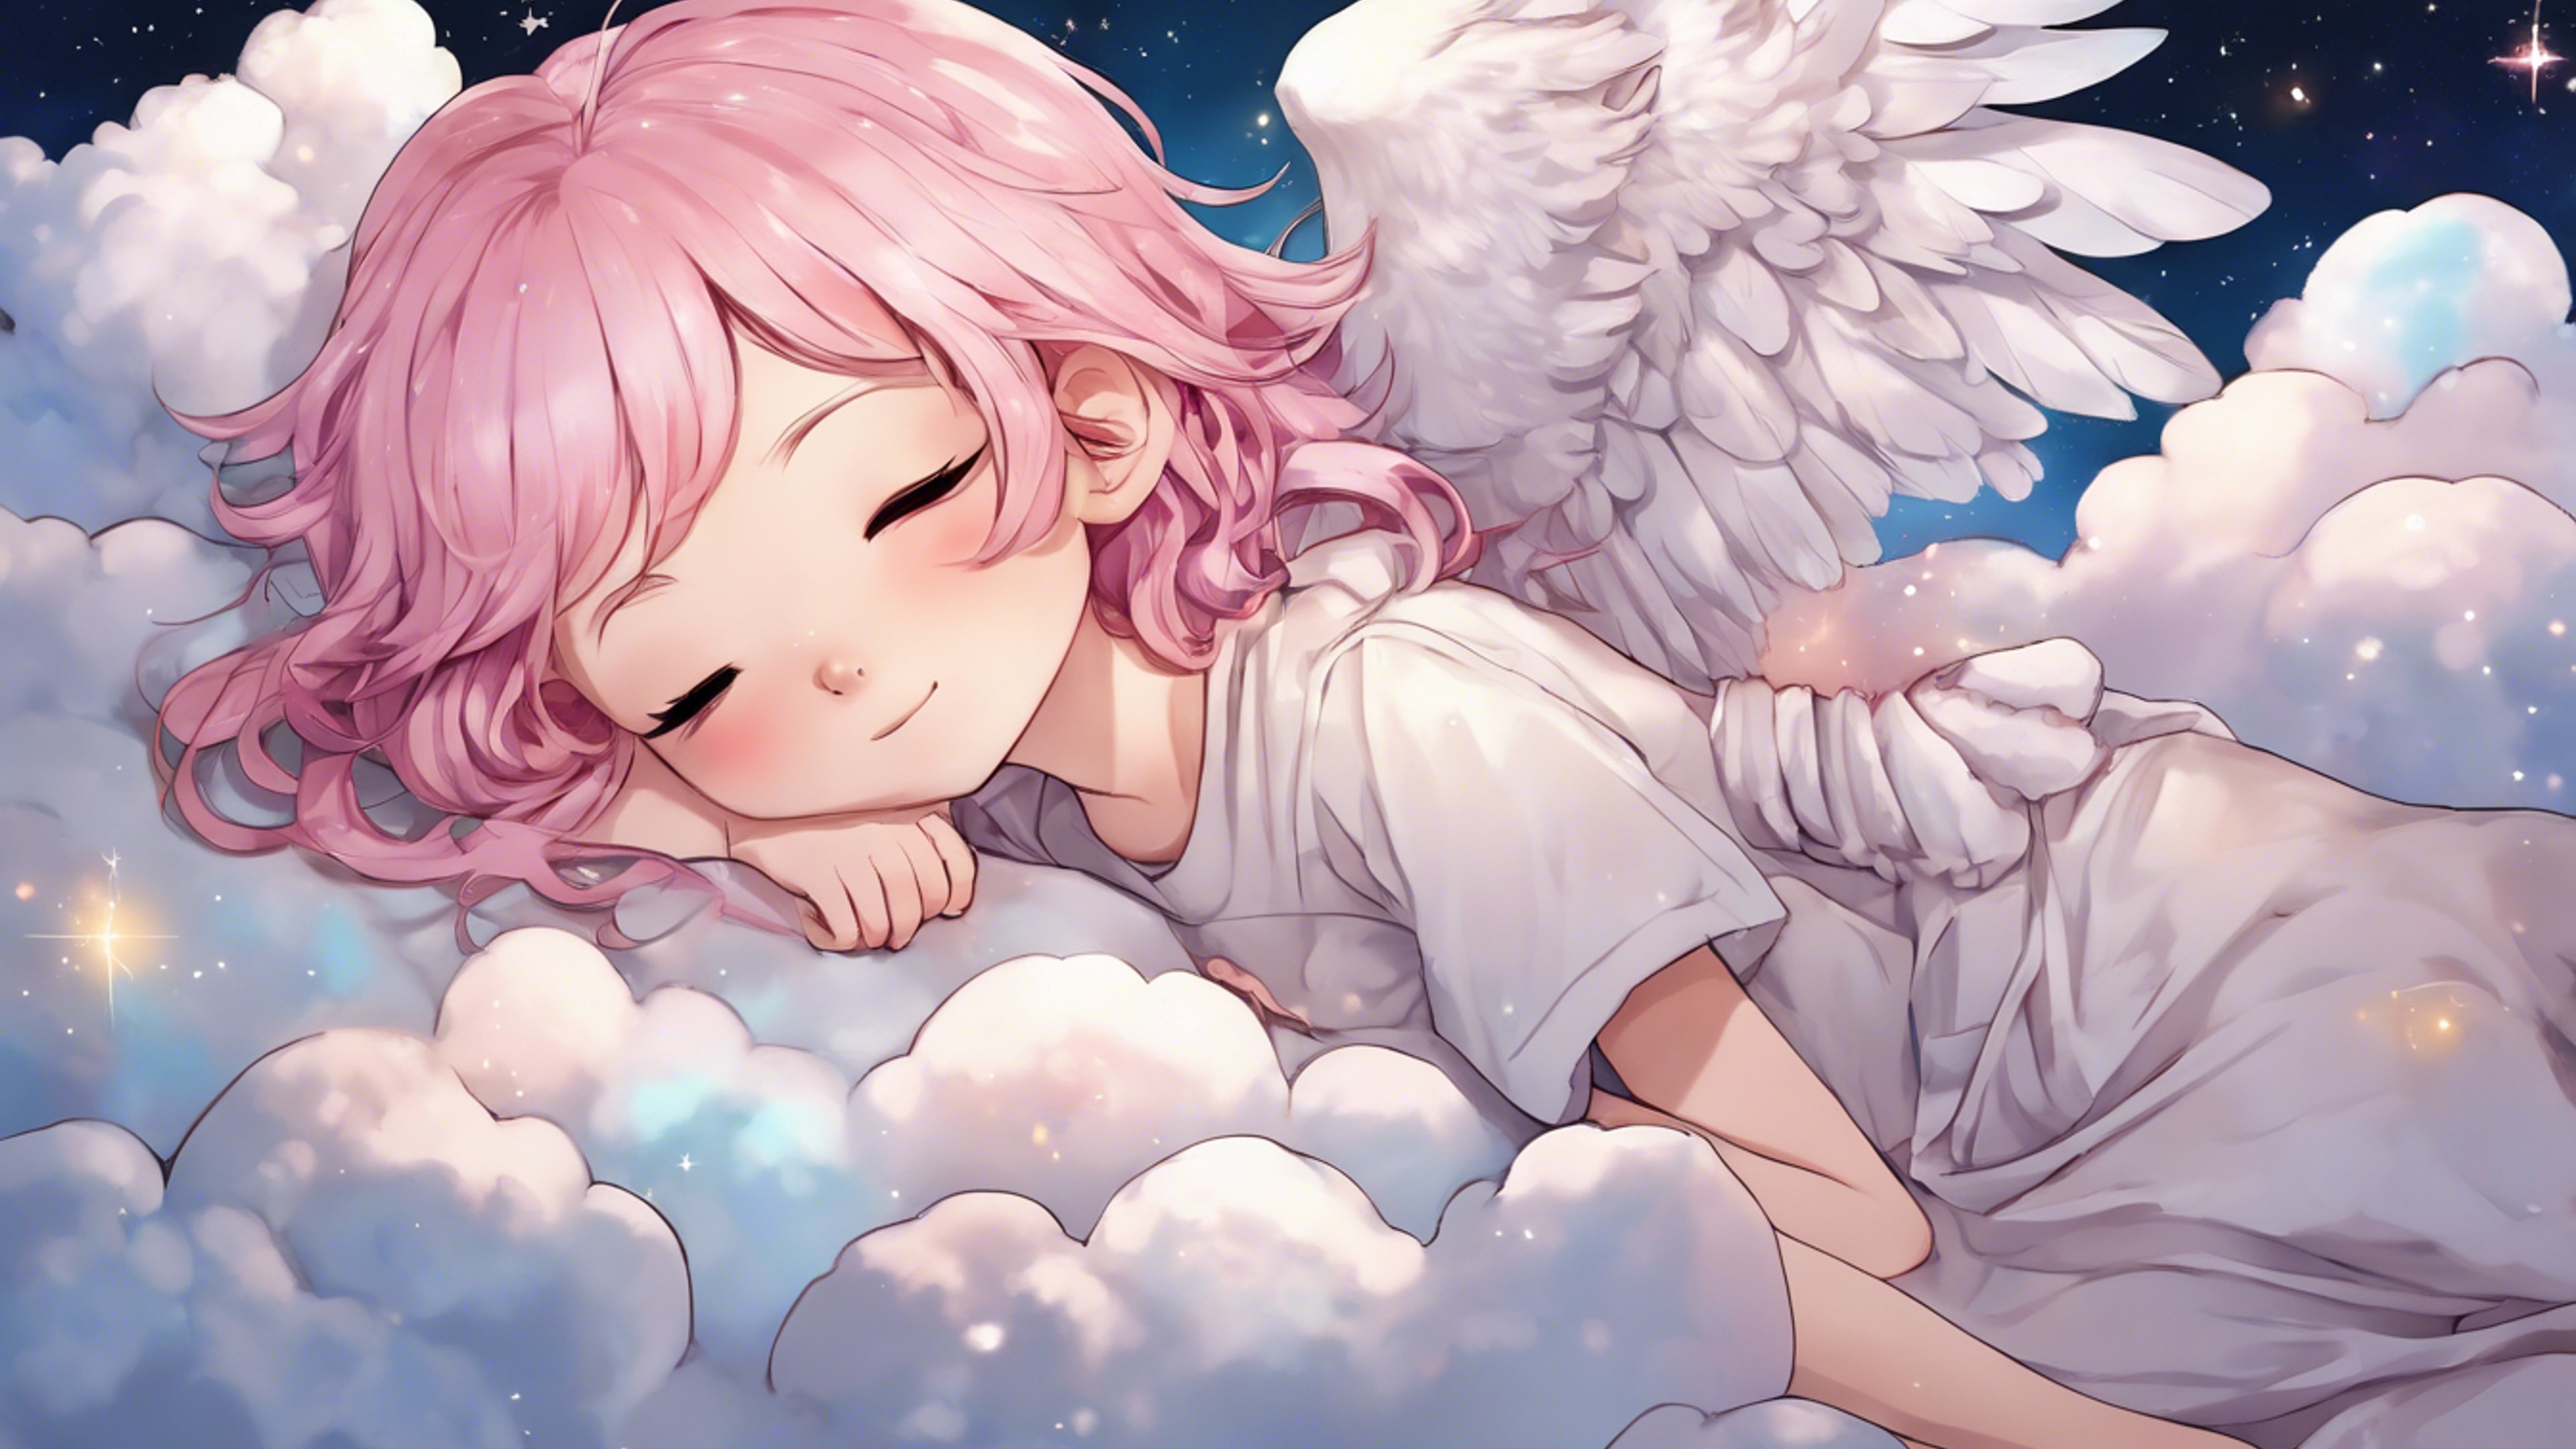 A chibi-style anime girl with pastel pink hair and angel wings, sleeping peacefully on a fluffy cloud under a starry night sky. Tapet[4a6f35b80bd74bd2872d]